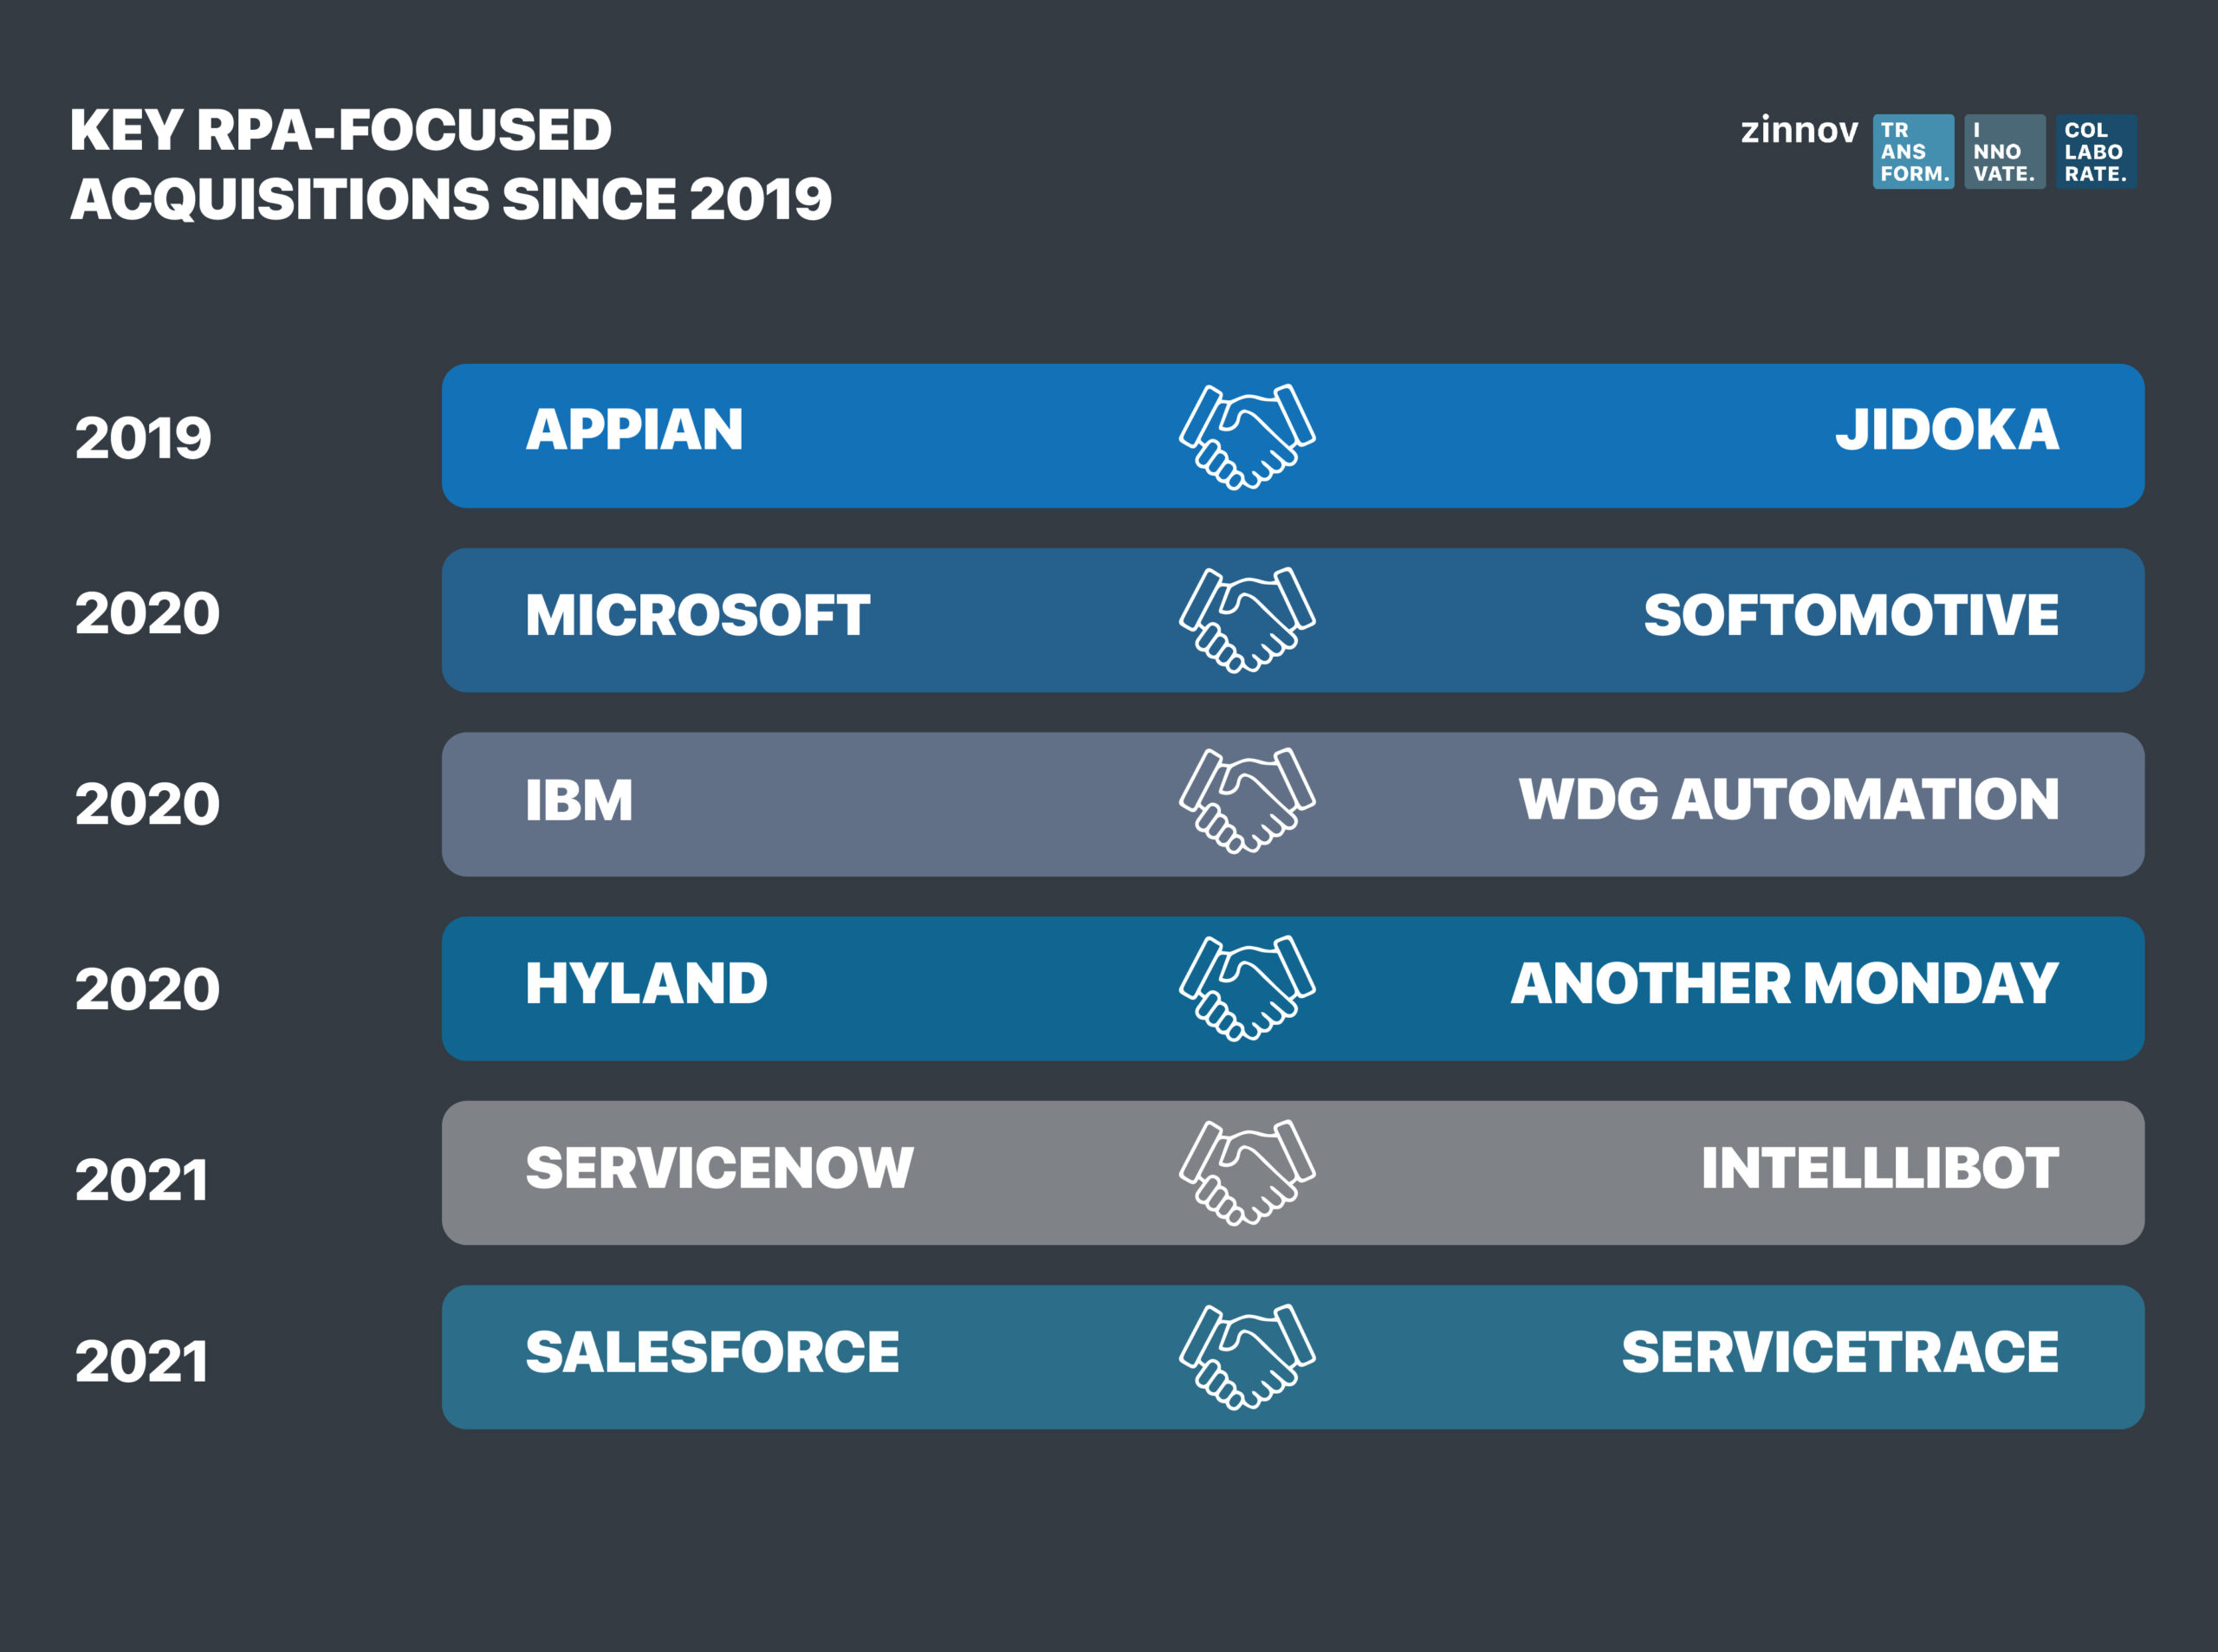 Key RPA-focused Acquisitions since 2019